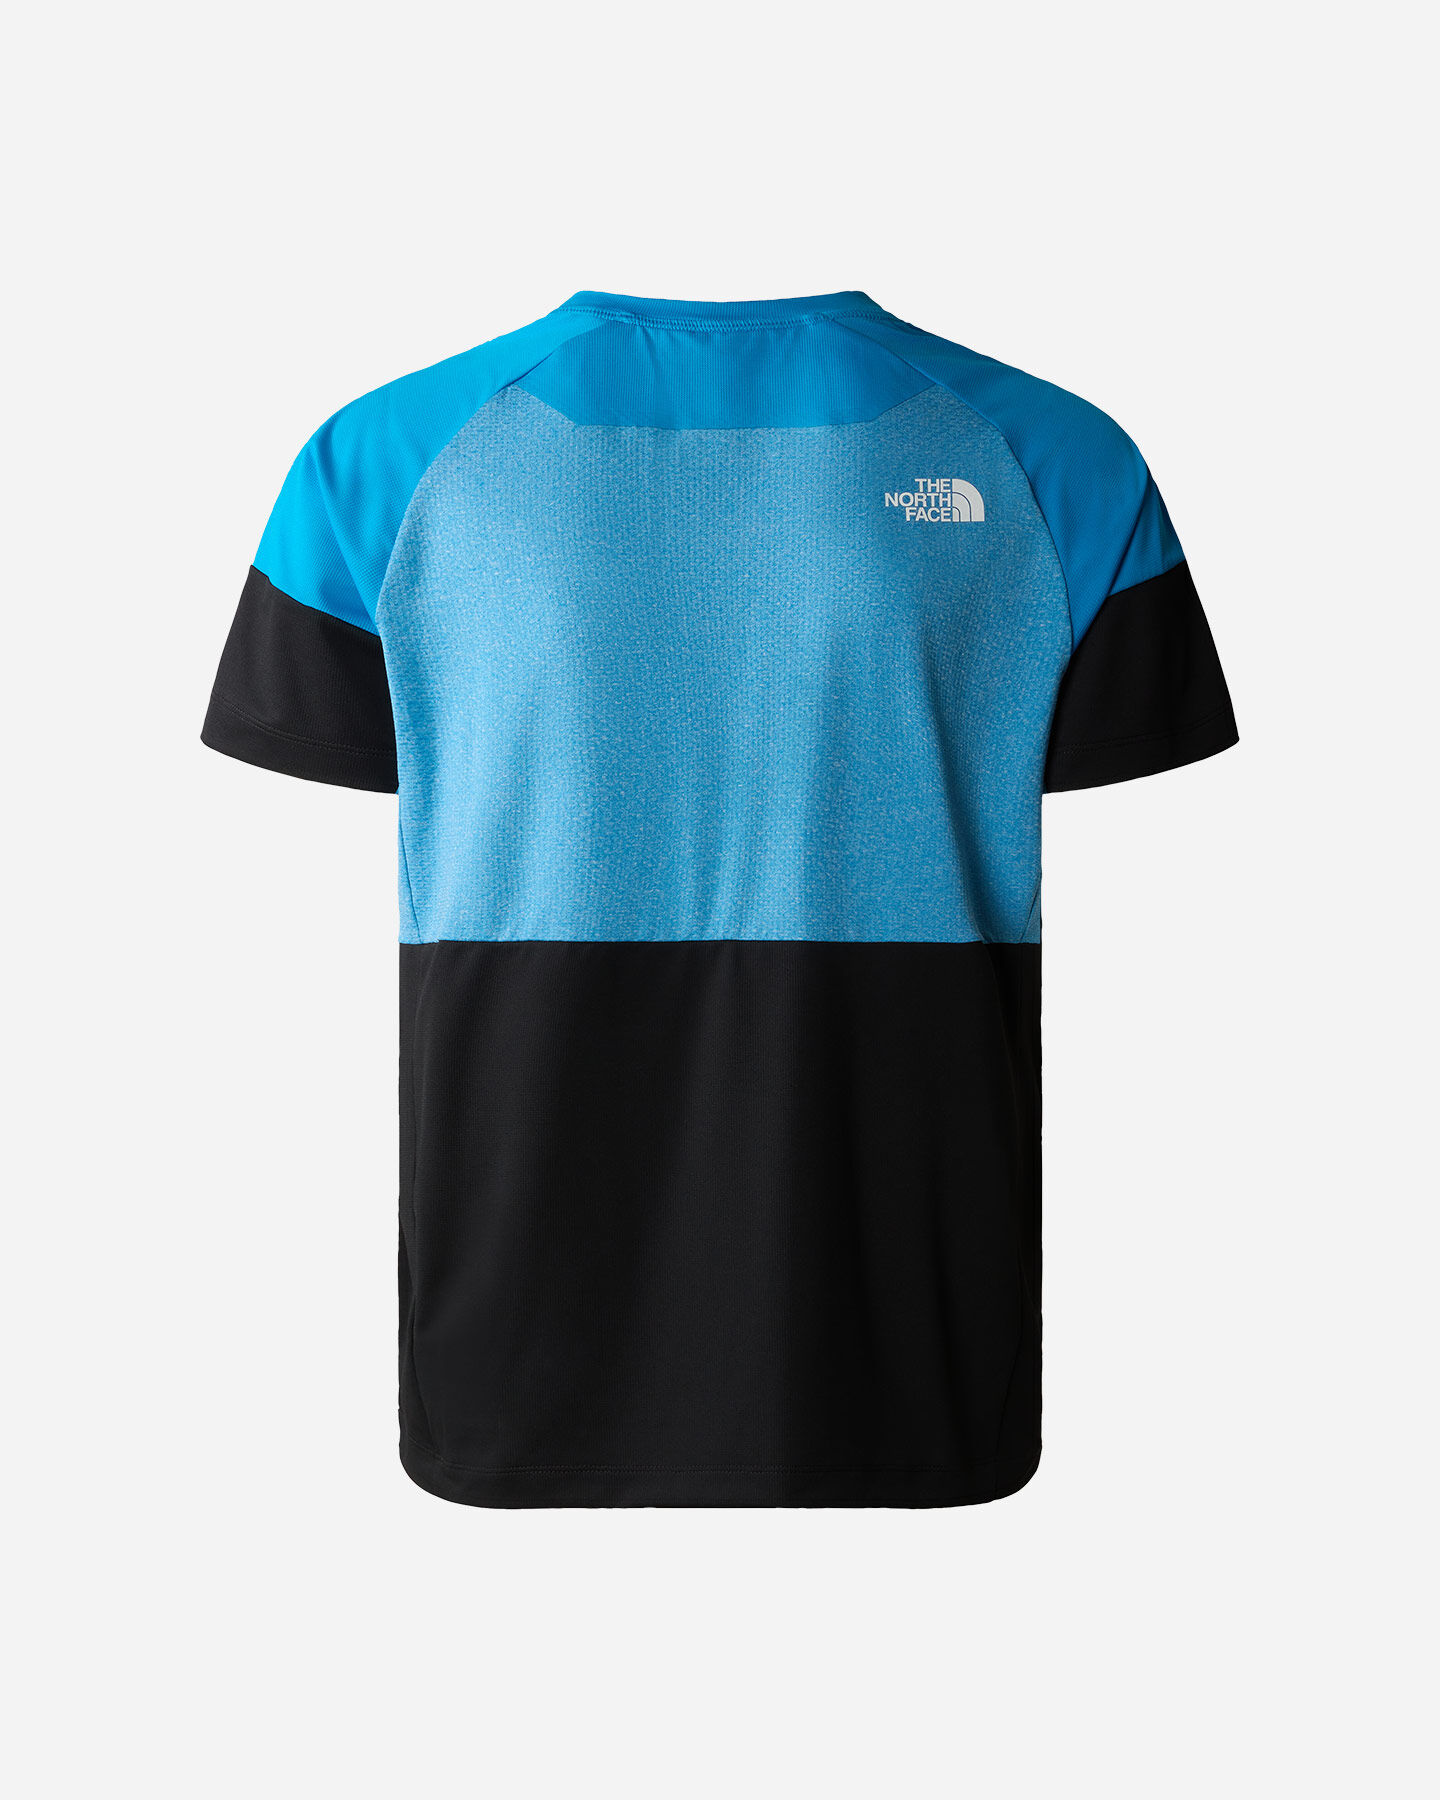  T-Shirt THE NORTH FACE BOLT TECH M S5650071|WIJ|S scatto 1